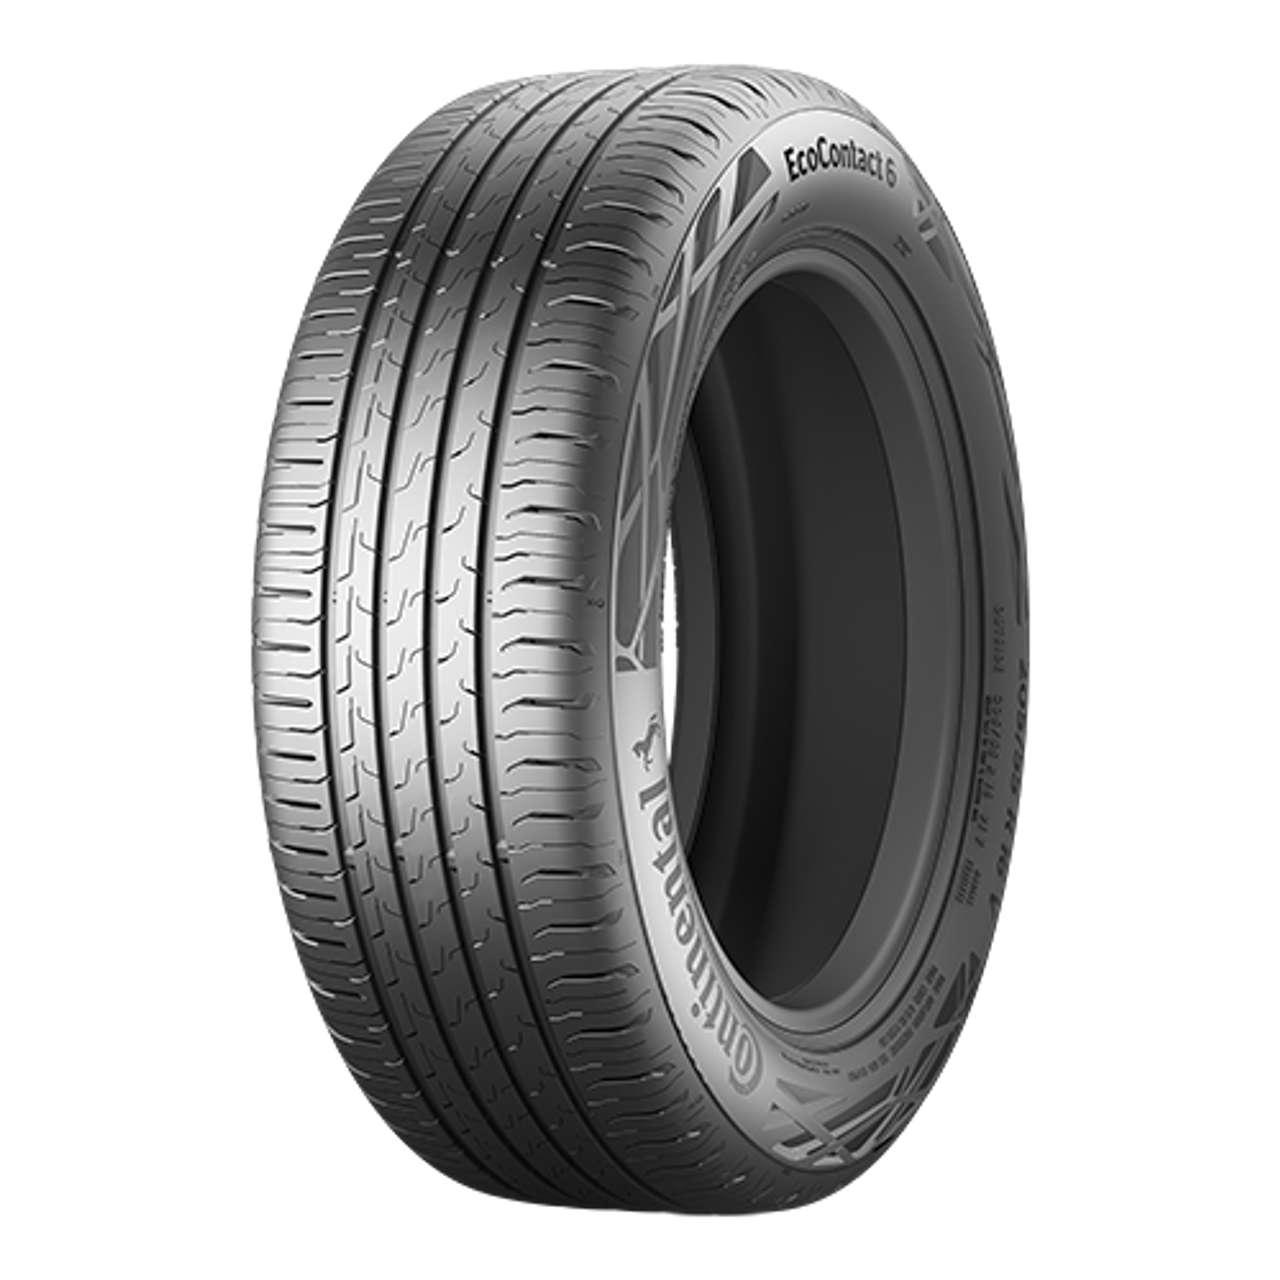 CONTINENTAL ECOCONTACT 6 (*) (EVc) 225/50R17 98Y BSW